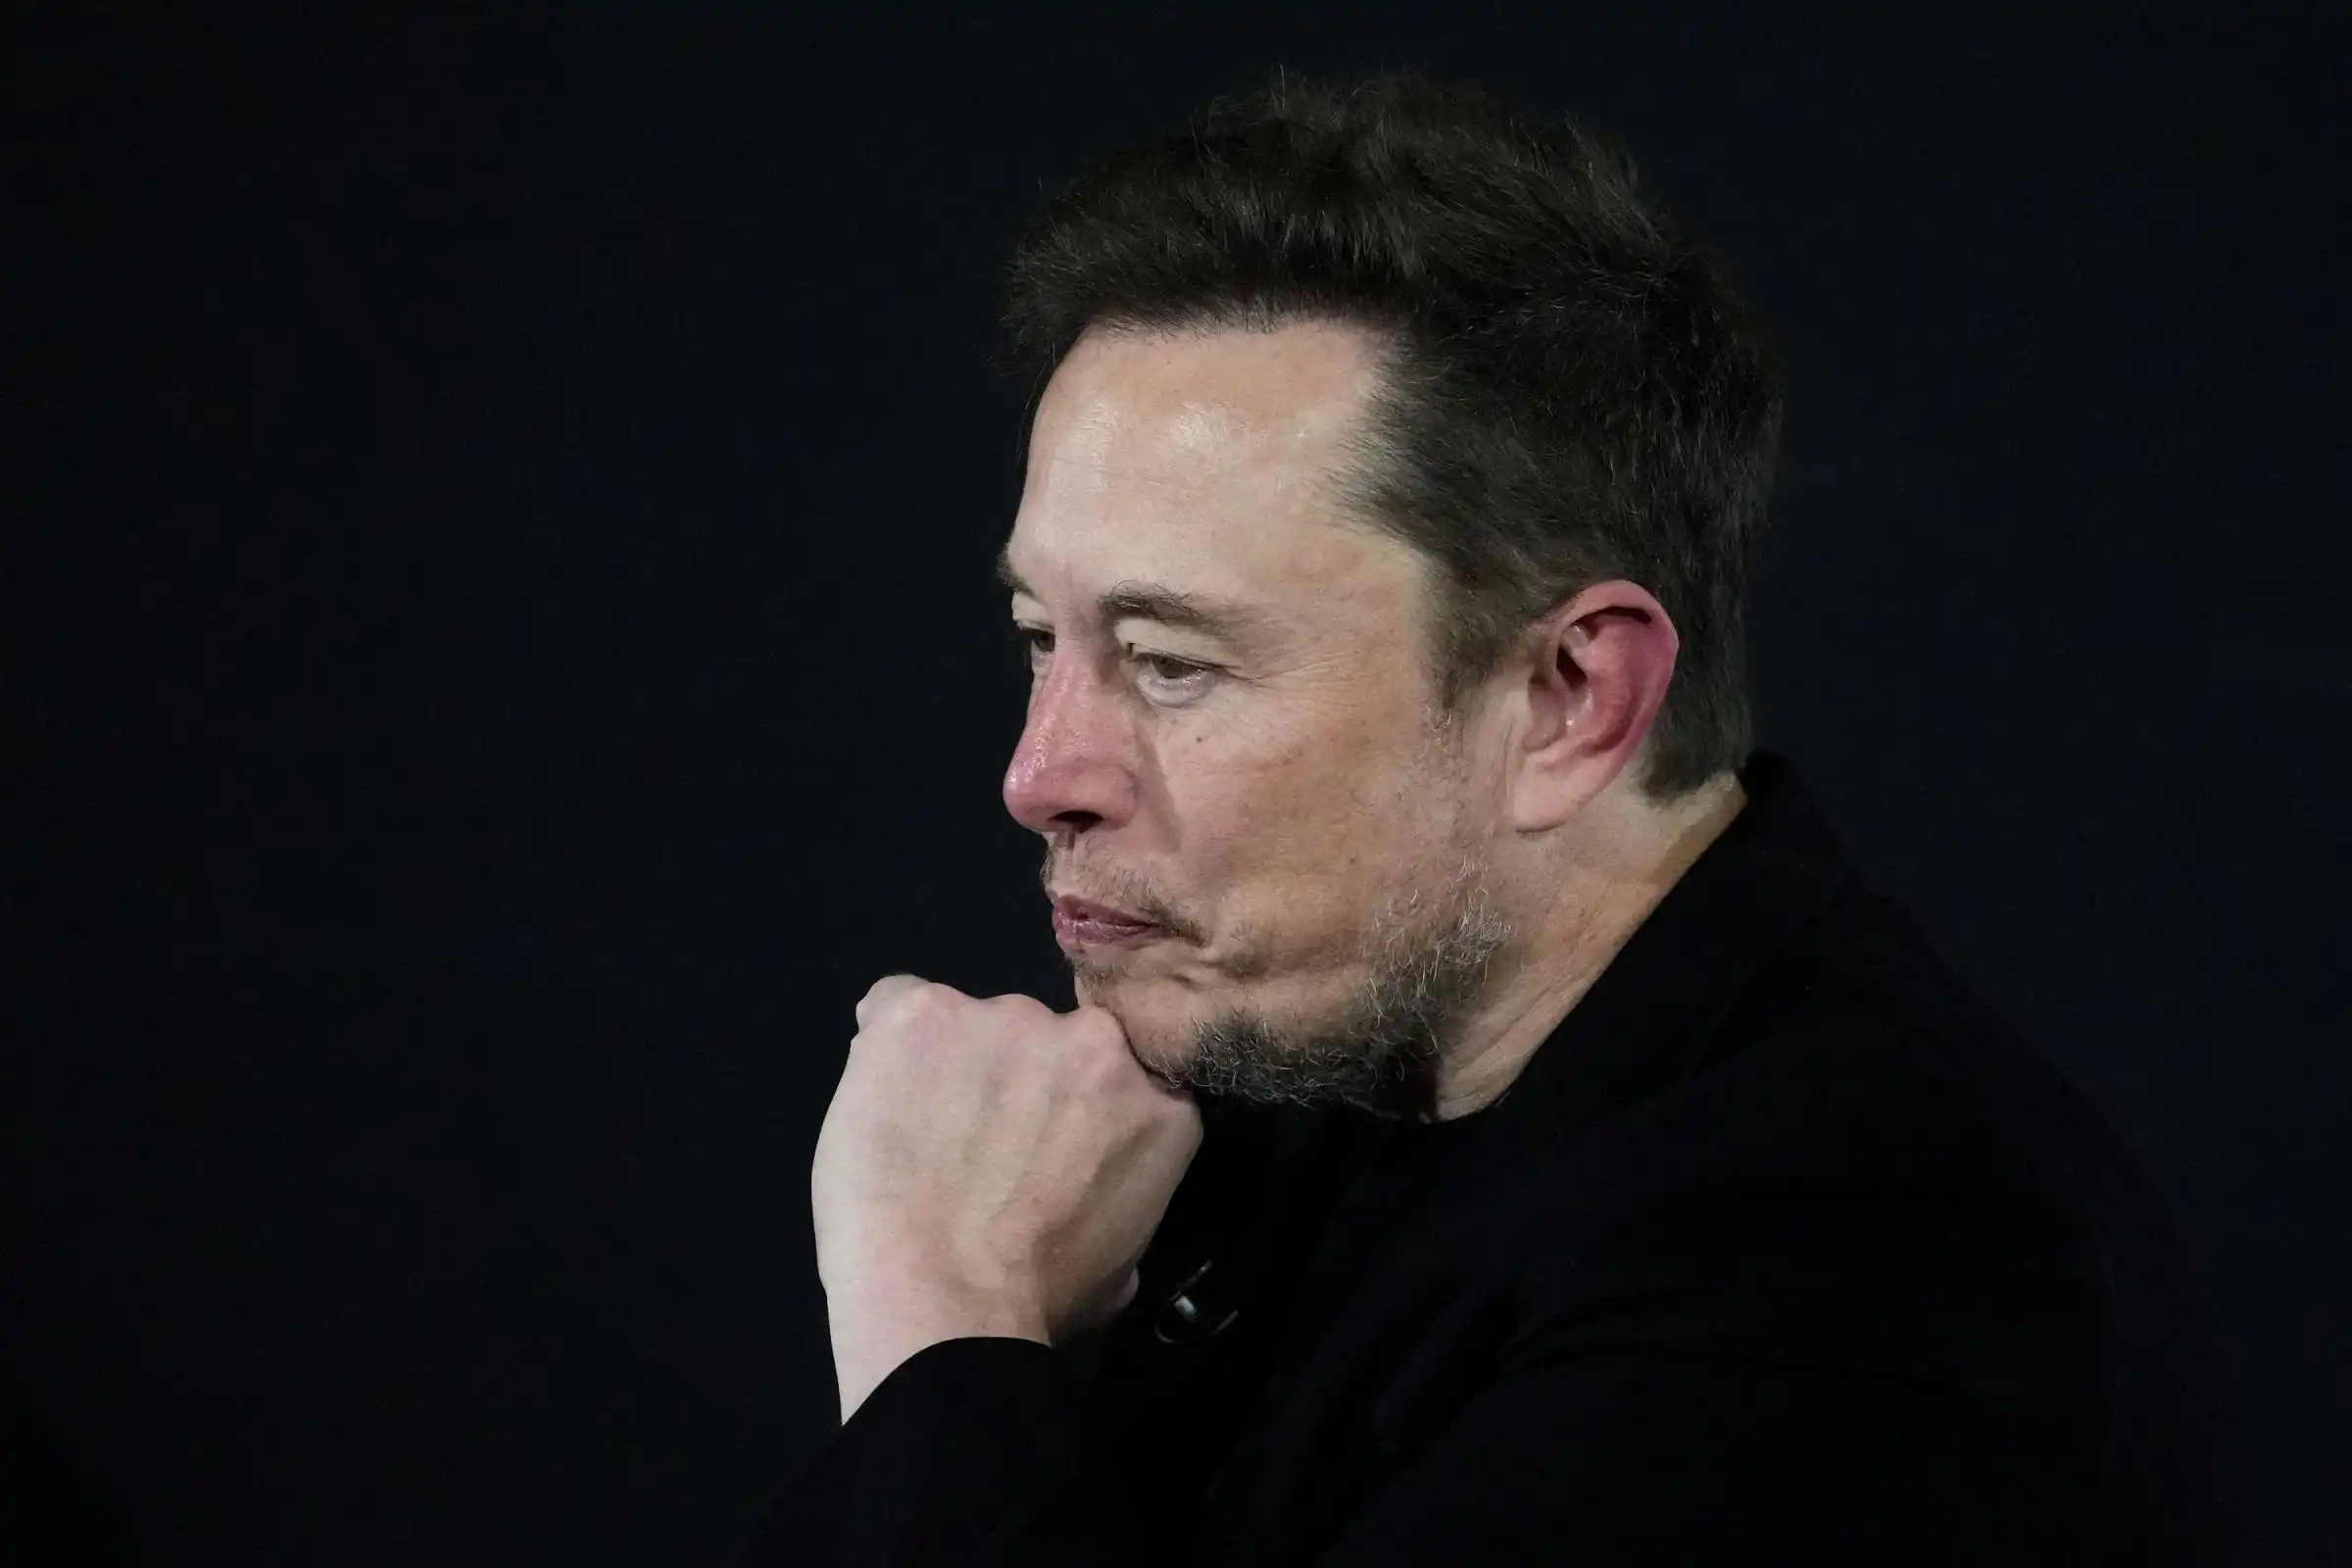 Elon Musk could ban Apple devices over OpenAI deal